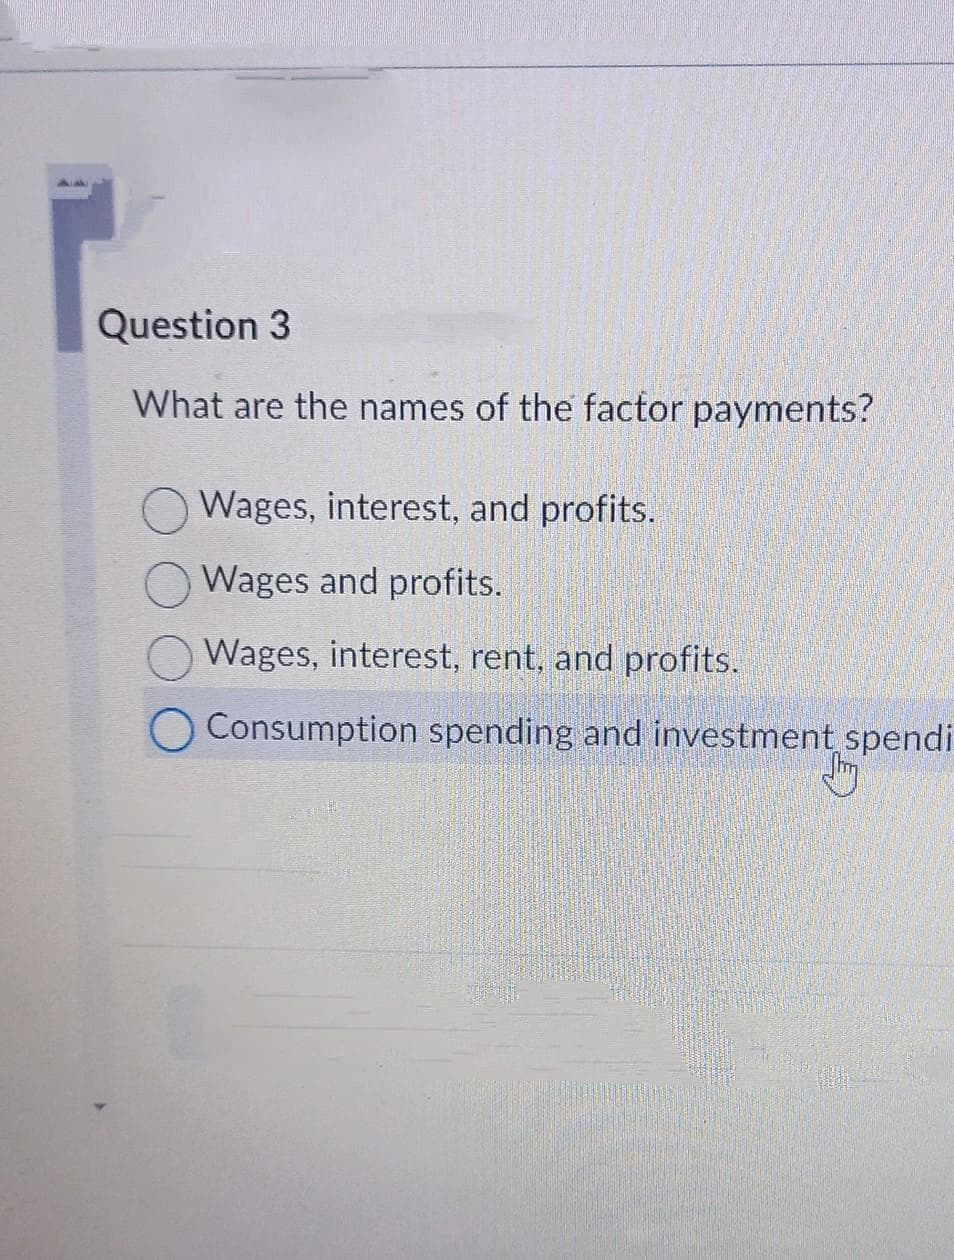 Question 3
What are the names of the factor payments?
Wages, interest, and profits.
Wages and profits.
Wages, interest, rent, and profits.
Consumption spending and investment spendi